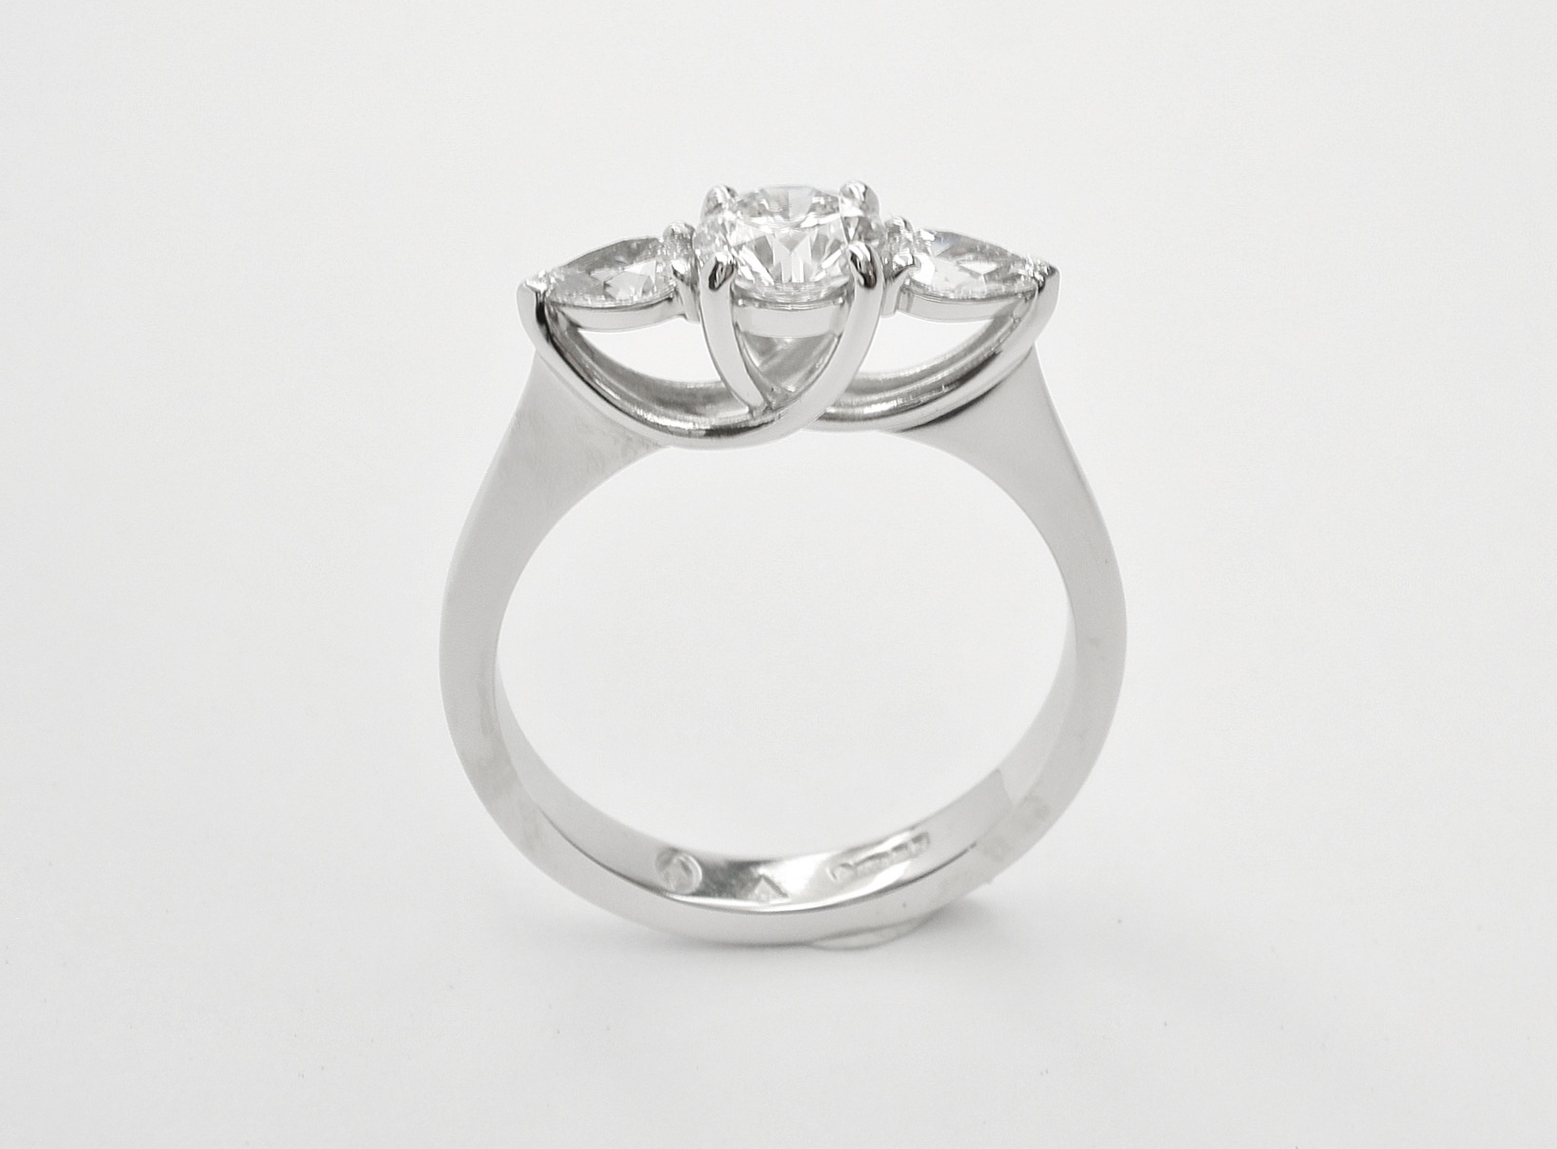 A 3 stone round brilliant cut and pear shaped diamond 'cradle' set ring mounted in platinum.